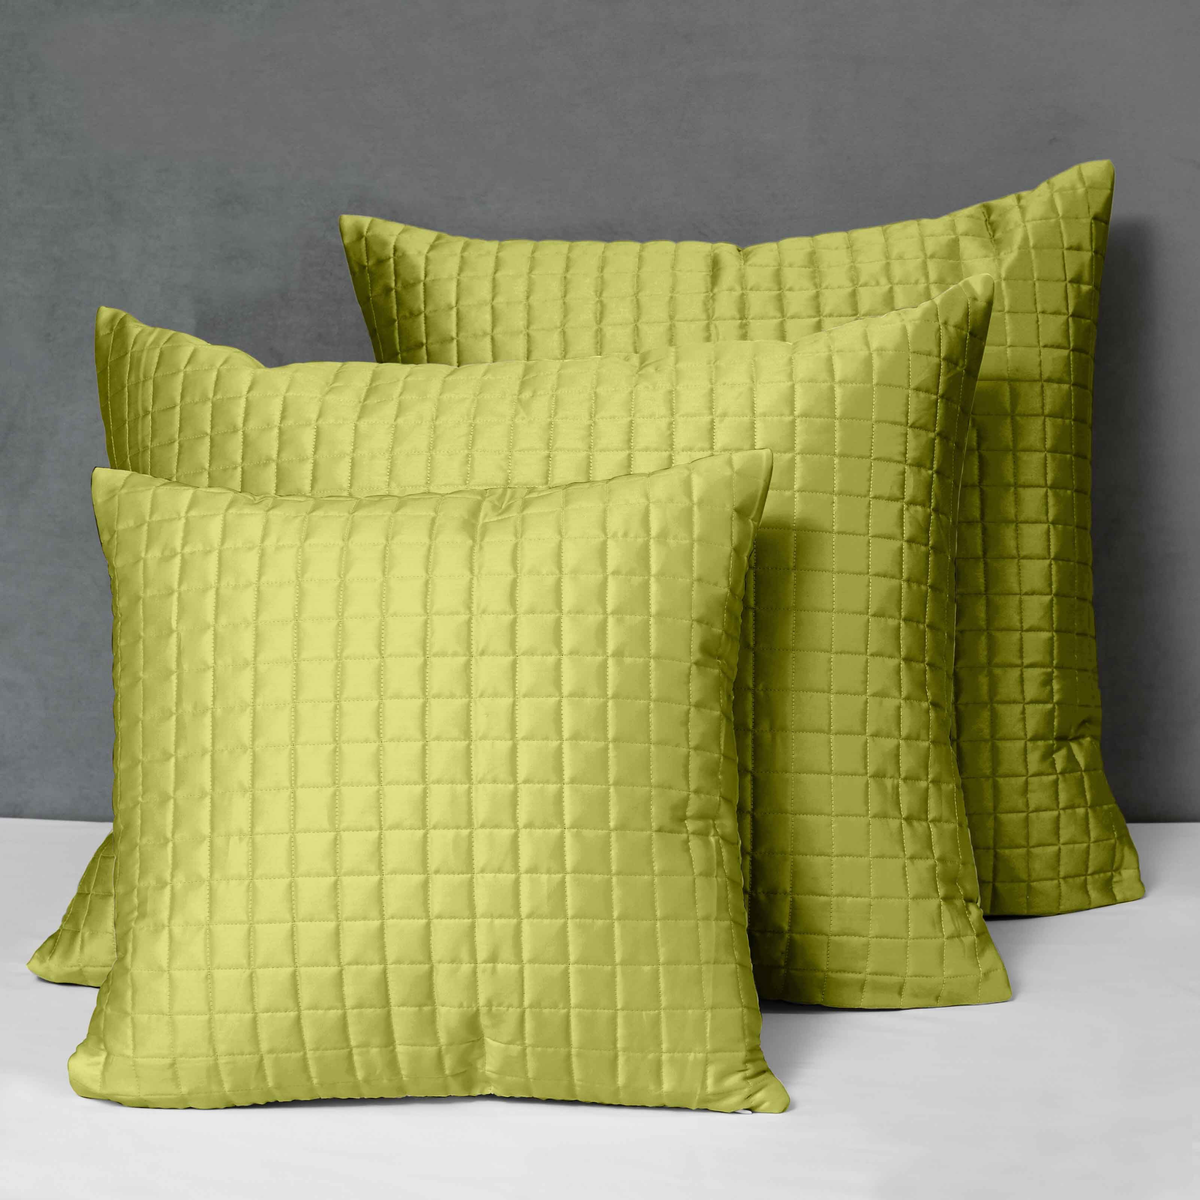 Different Sizes of Quilted Shams of Signoria Masaccio Bedding in Moss Green Color